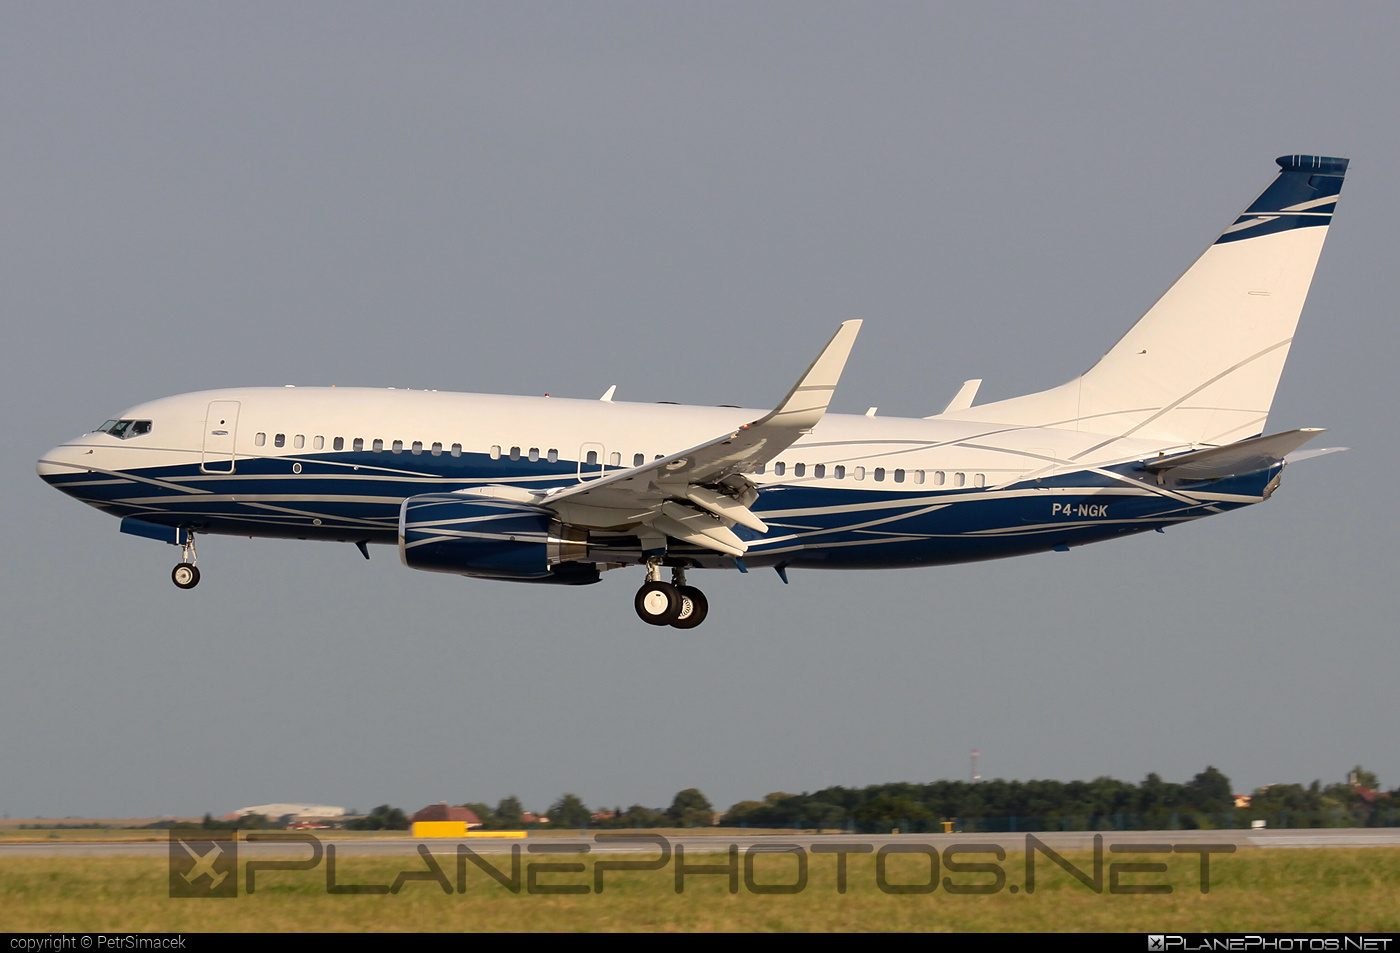 Boeing 737-700 BBJ - P4-NGK operated by Private operator #b737 #b737bbj #bbj #boeing #boeing737 #boeingbusinessjet